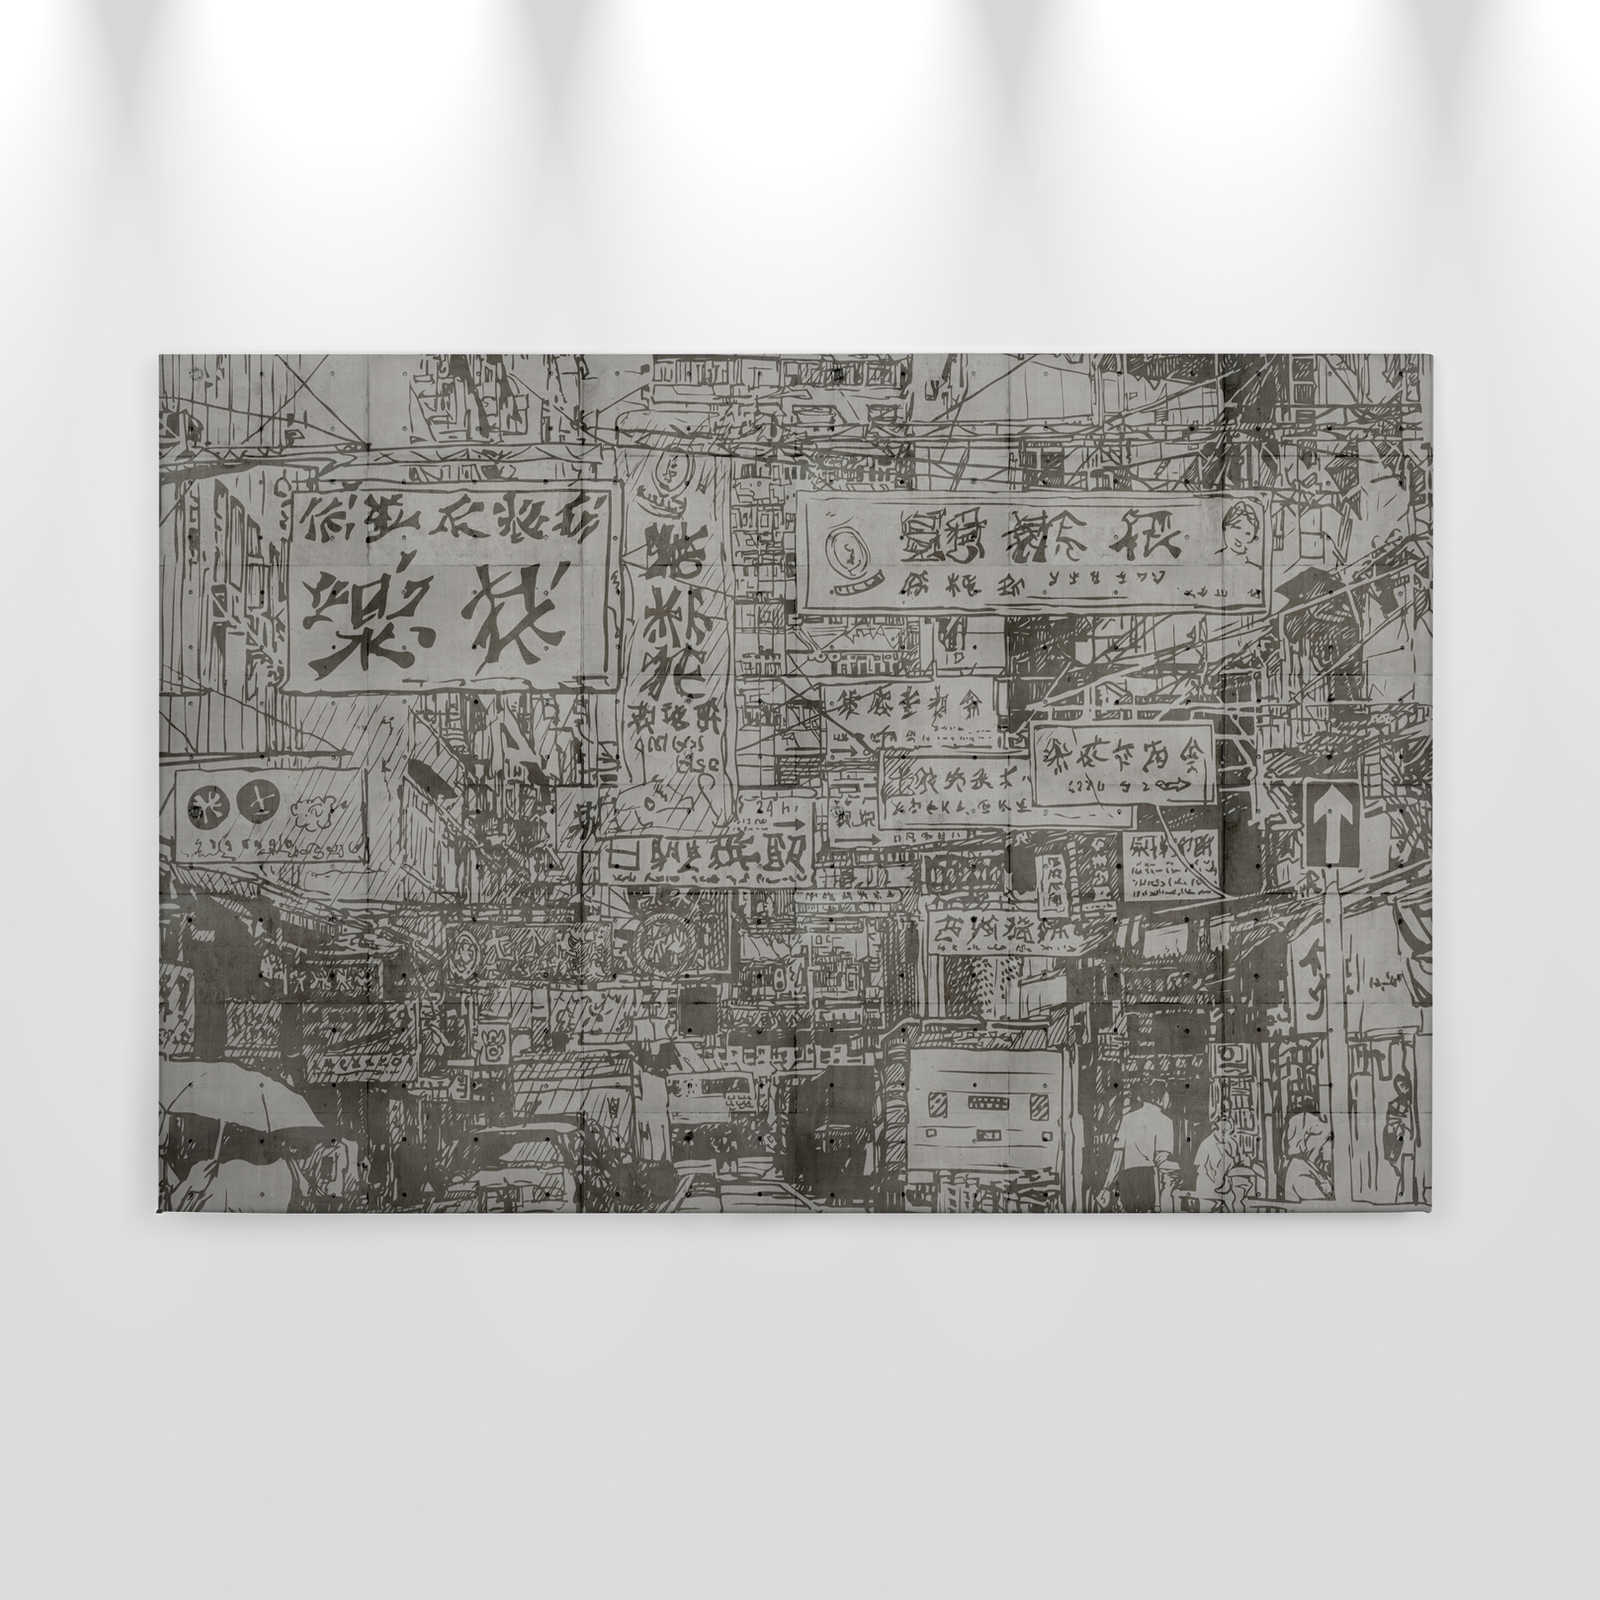             Downtown 1- Canvas painting with China look in concrete structure - 0.90 m x 0.60 m
        